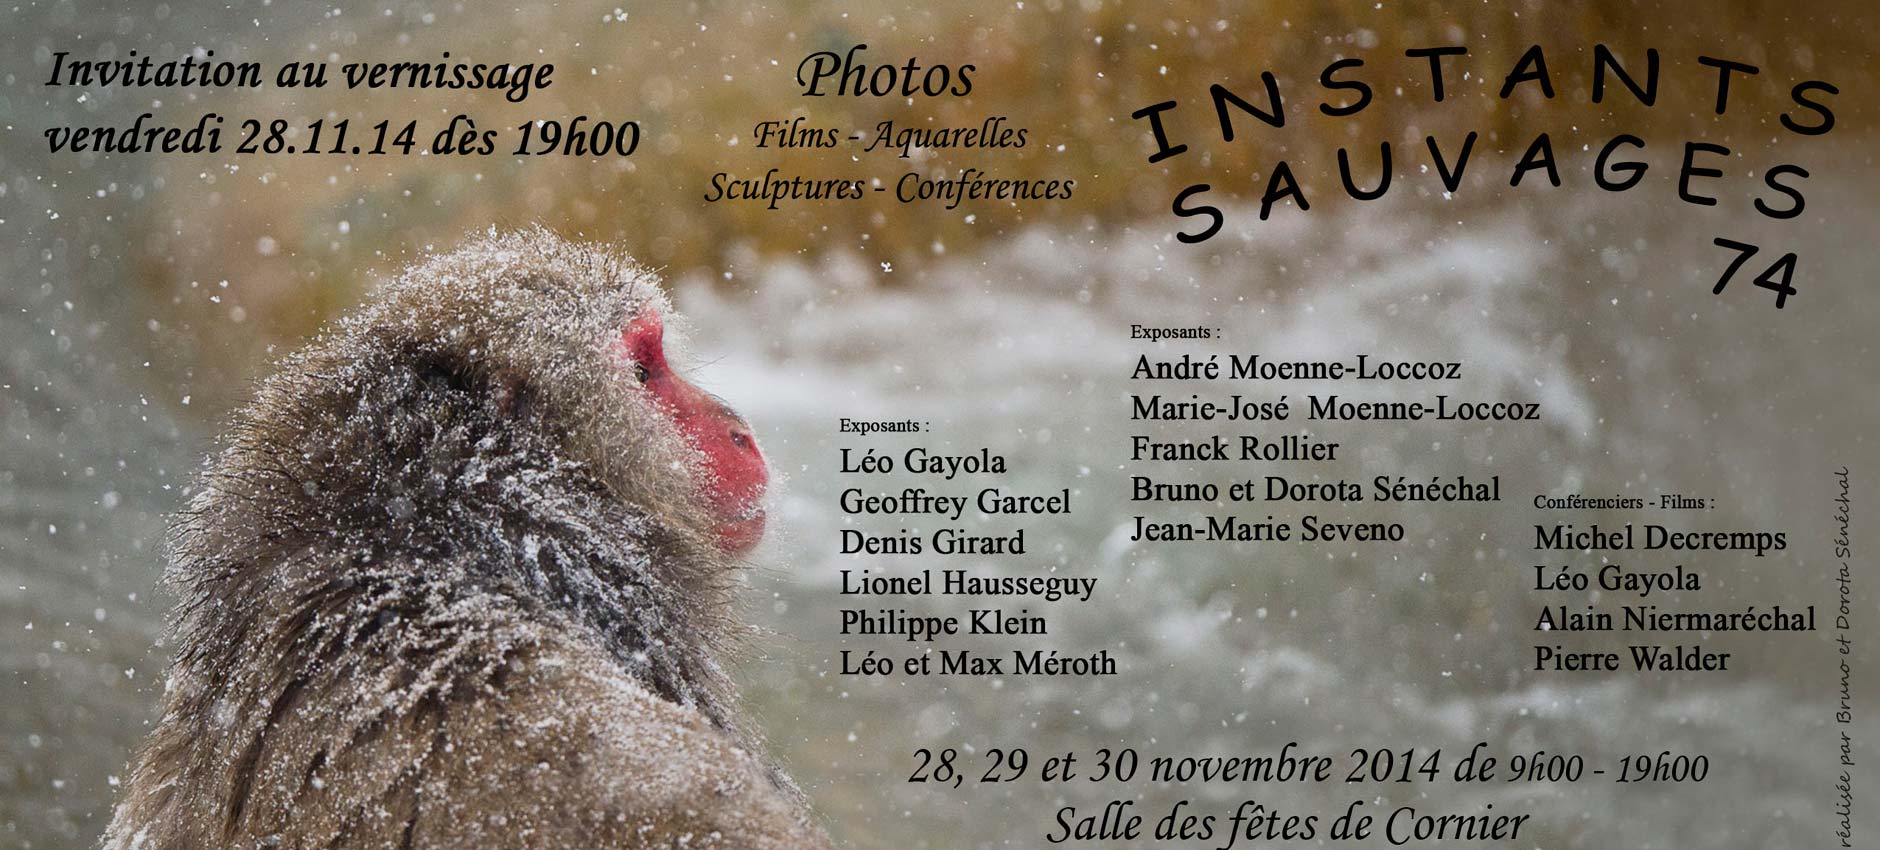 Festival Instants Sauvages 2014